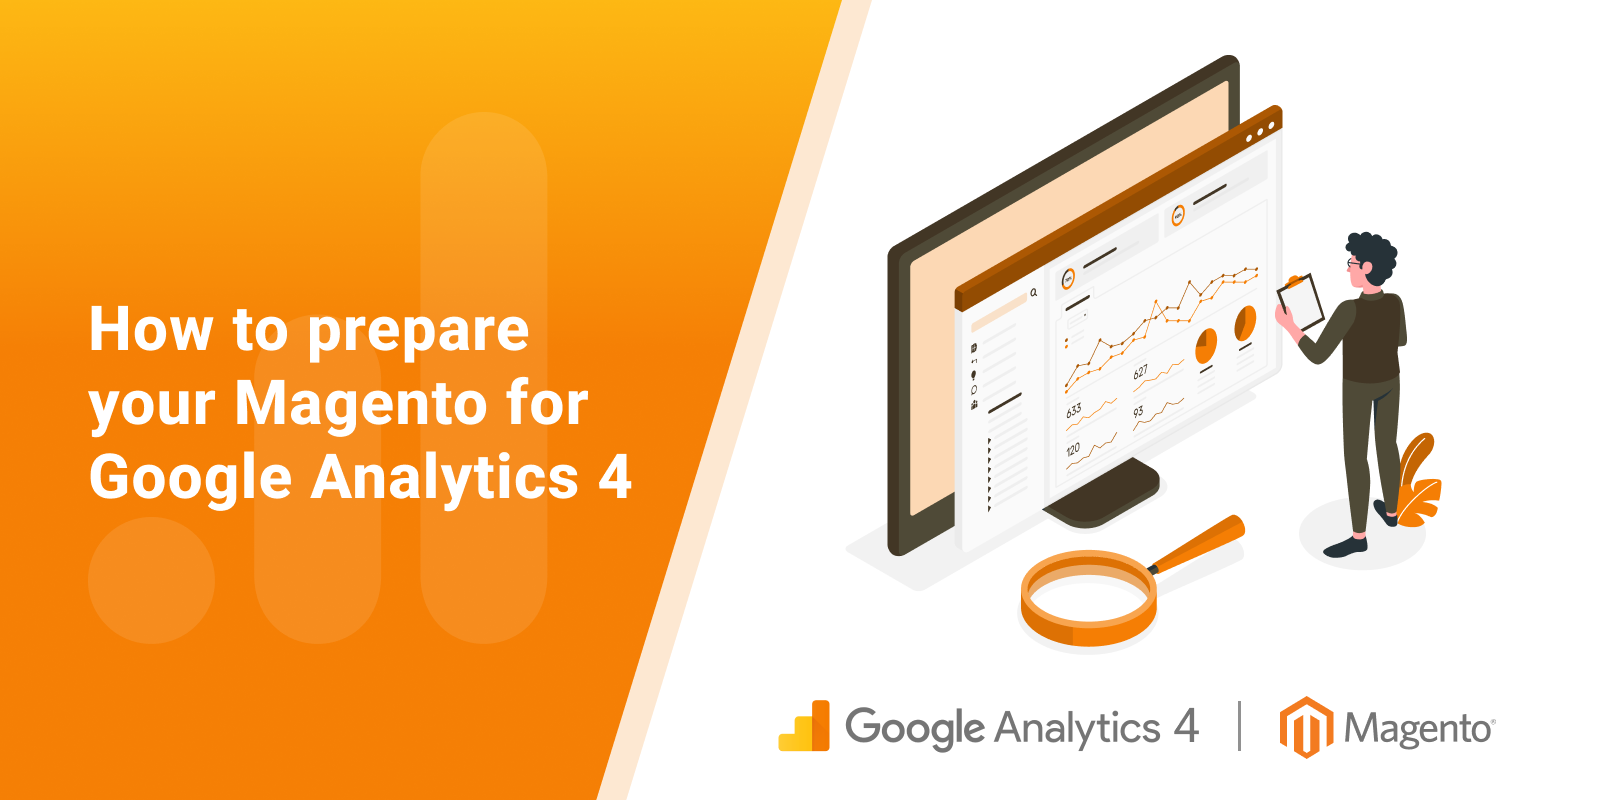 Get ready to use Google Analytics 4 in Magento 2